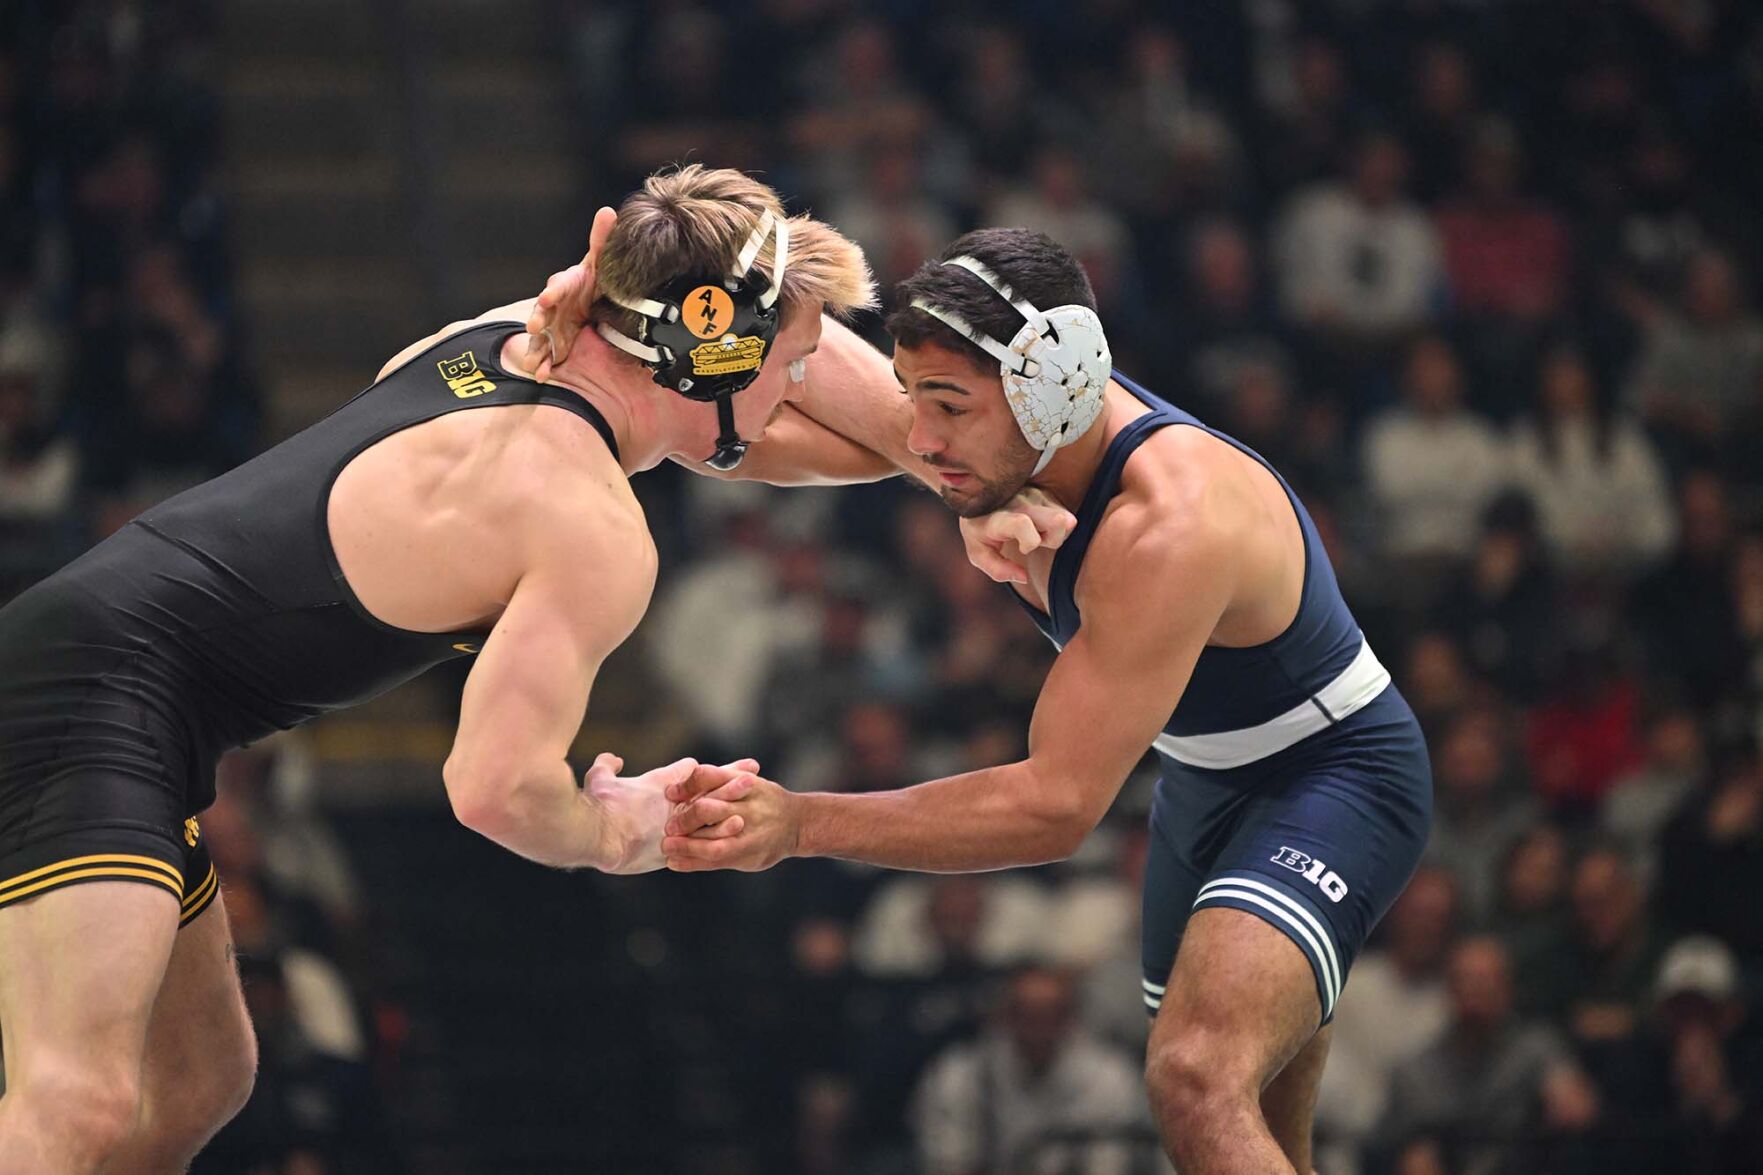 NCAA wrestling Central Cambria grad Murin ready for one final tournament Sports tribdem